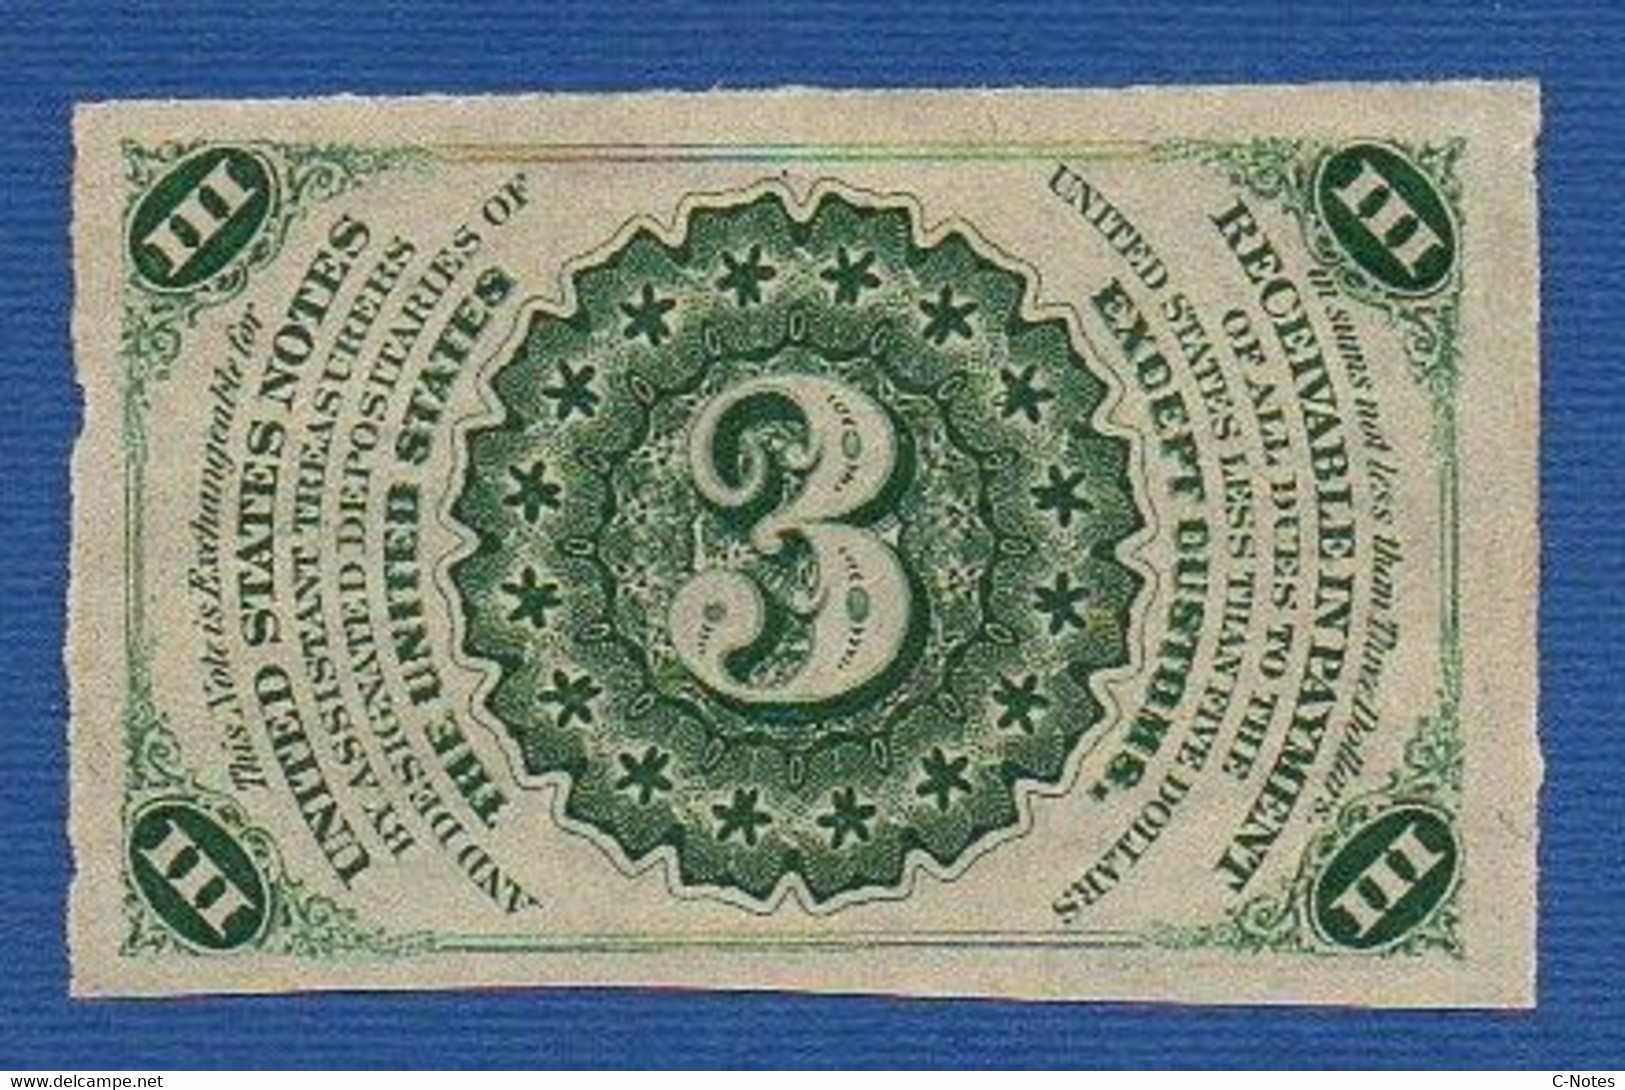 UNITED STATES OF AMERICA - P.105a – 3 Cents 1863 AUNC, No Serial Number - 1863 : 3 Uitgave